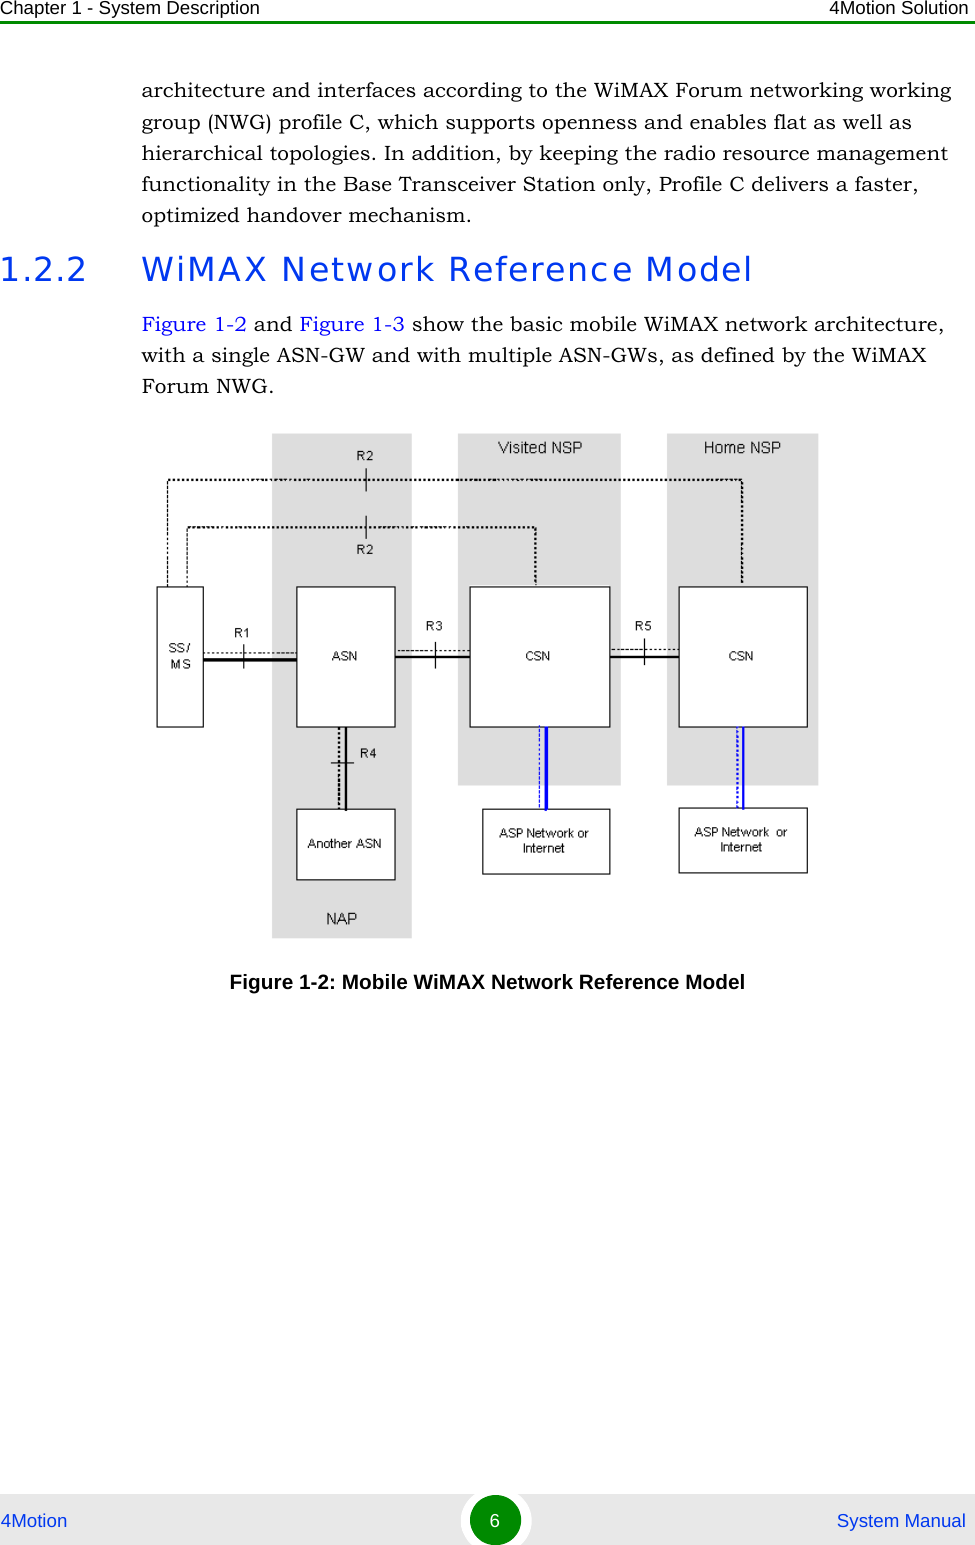 Chapter 1 - System Description 4Motion Solution4Motion 6 System Manualarchitecture and interfaces according to the WiMAX Forum networking working group (NWG) profile C, which supports openness and enables flat as well as hierarchical topologies. In addition, by keeping the radio resource management functionality in the Base Transceiver Station only, Profile C delivers a faster, optimized handover mechanism.1.2.2 WiMAX Network Reference ModelFigure 1-2 and Figure 1-3 show the basic mobile WiMAX network architecture, with a single ASN-GW and with multiple ASN-GWs, as defined by the WiMAX Forum NWG.Figure 1-2: Mobile WiMAX Network Reference Model